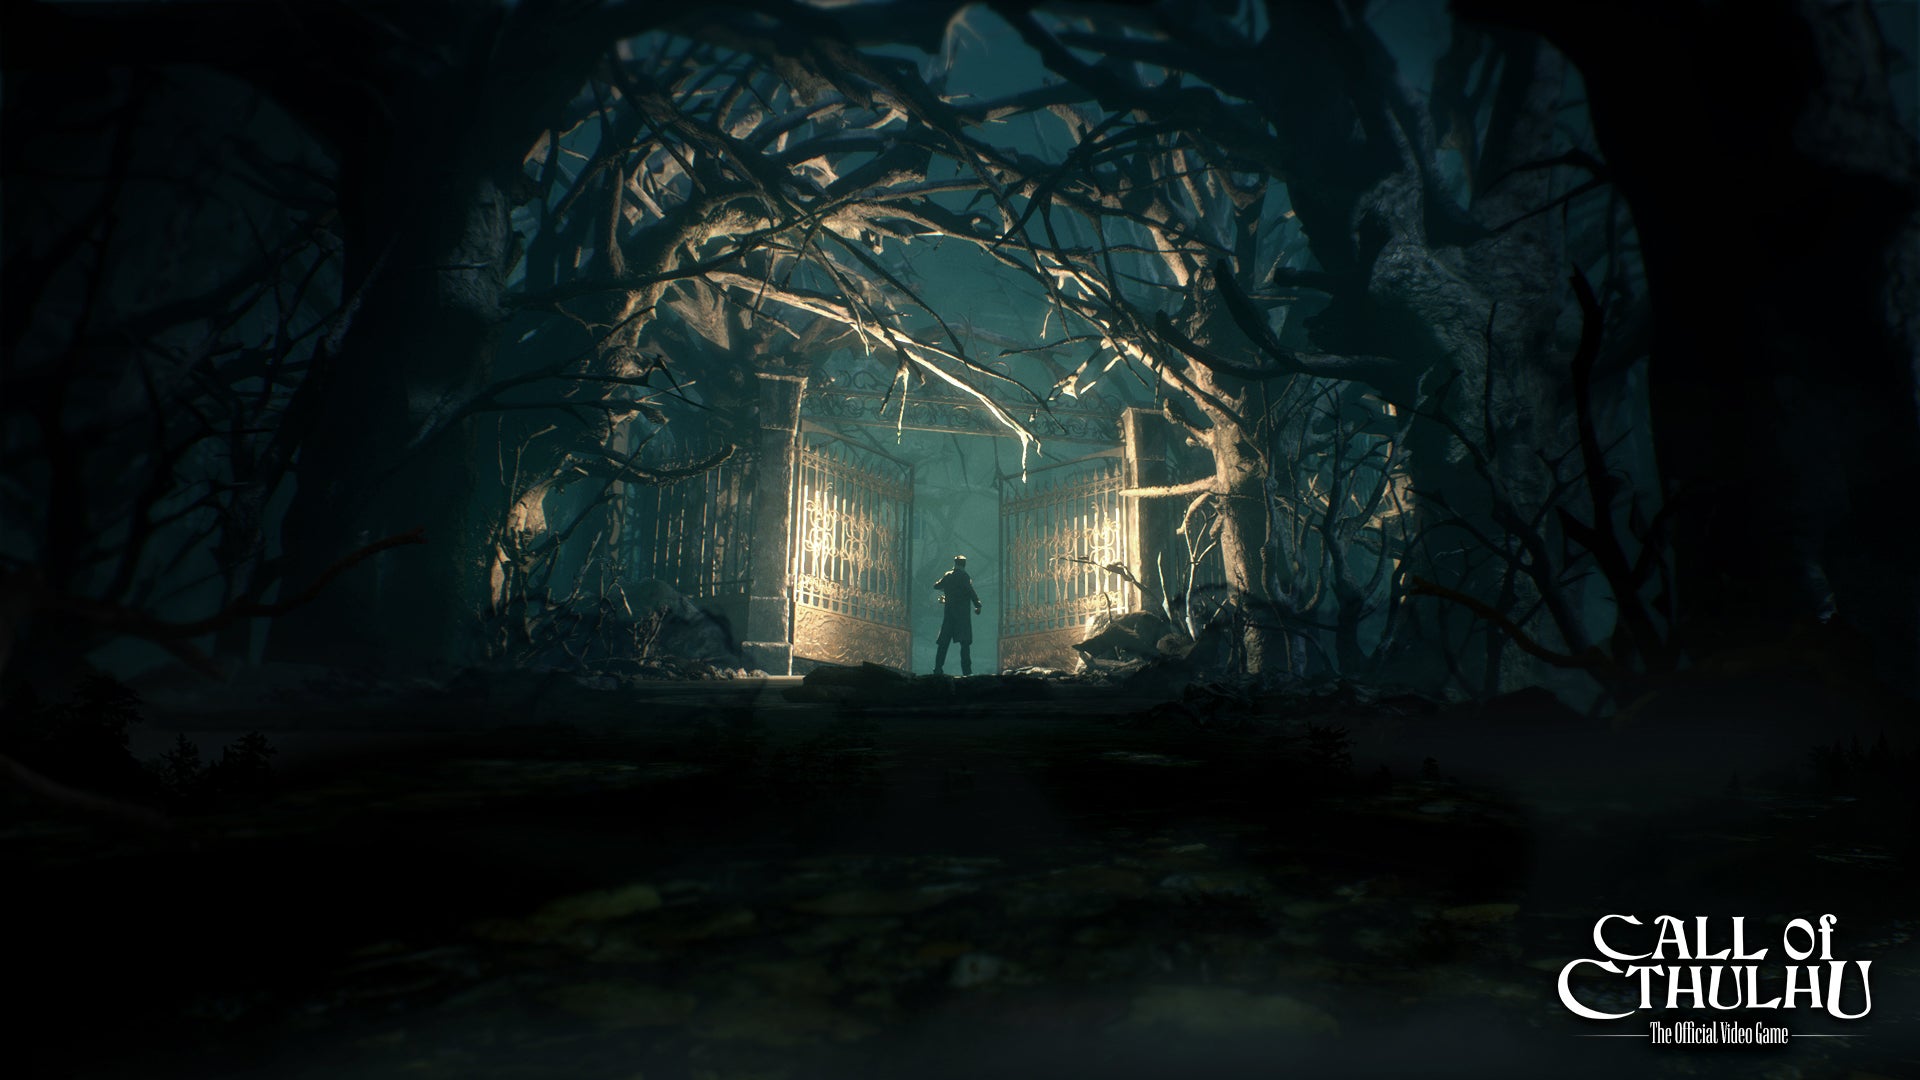 Image for Call of Cthulhu's stars align for a new release window